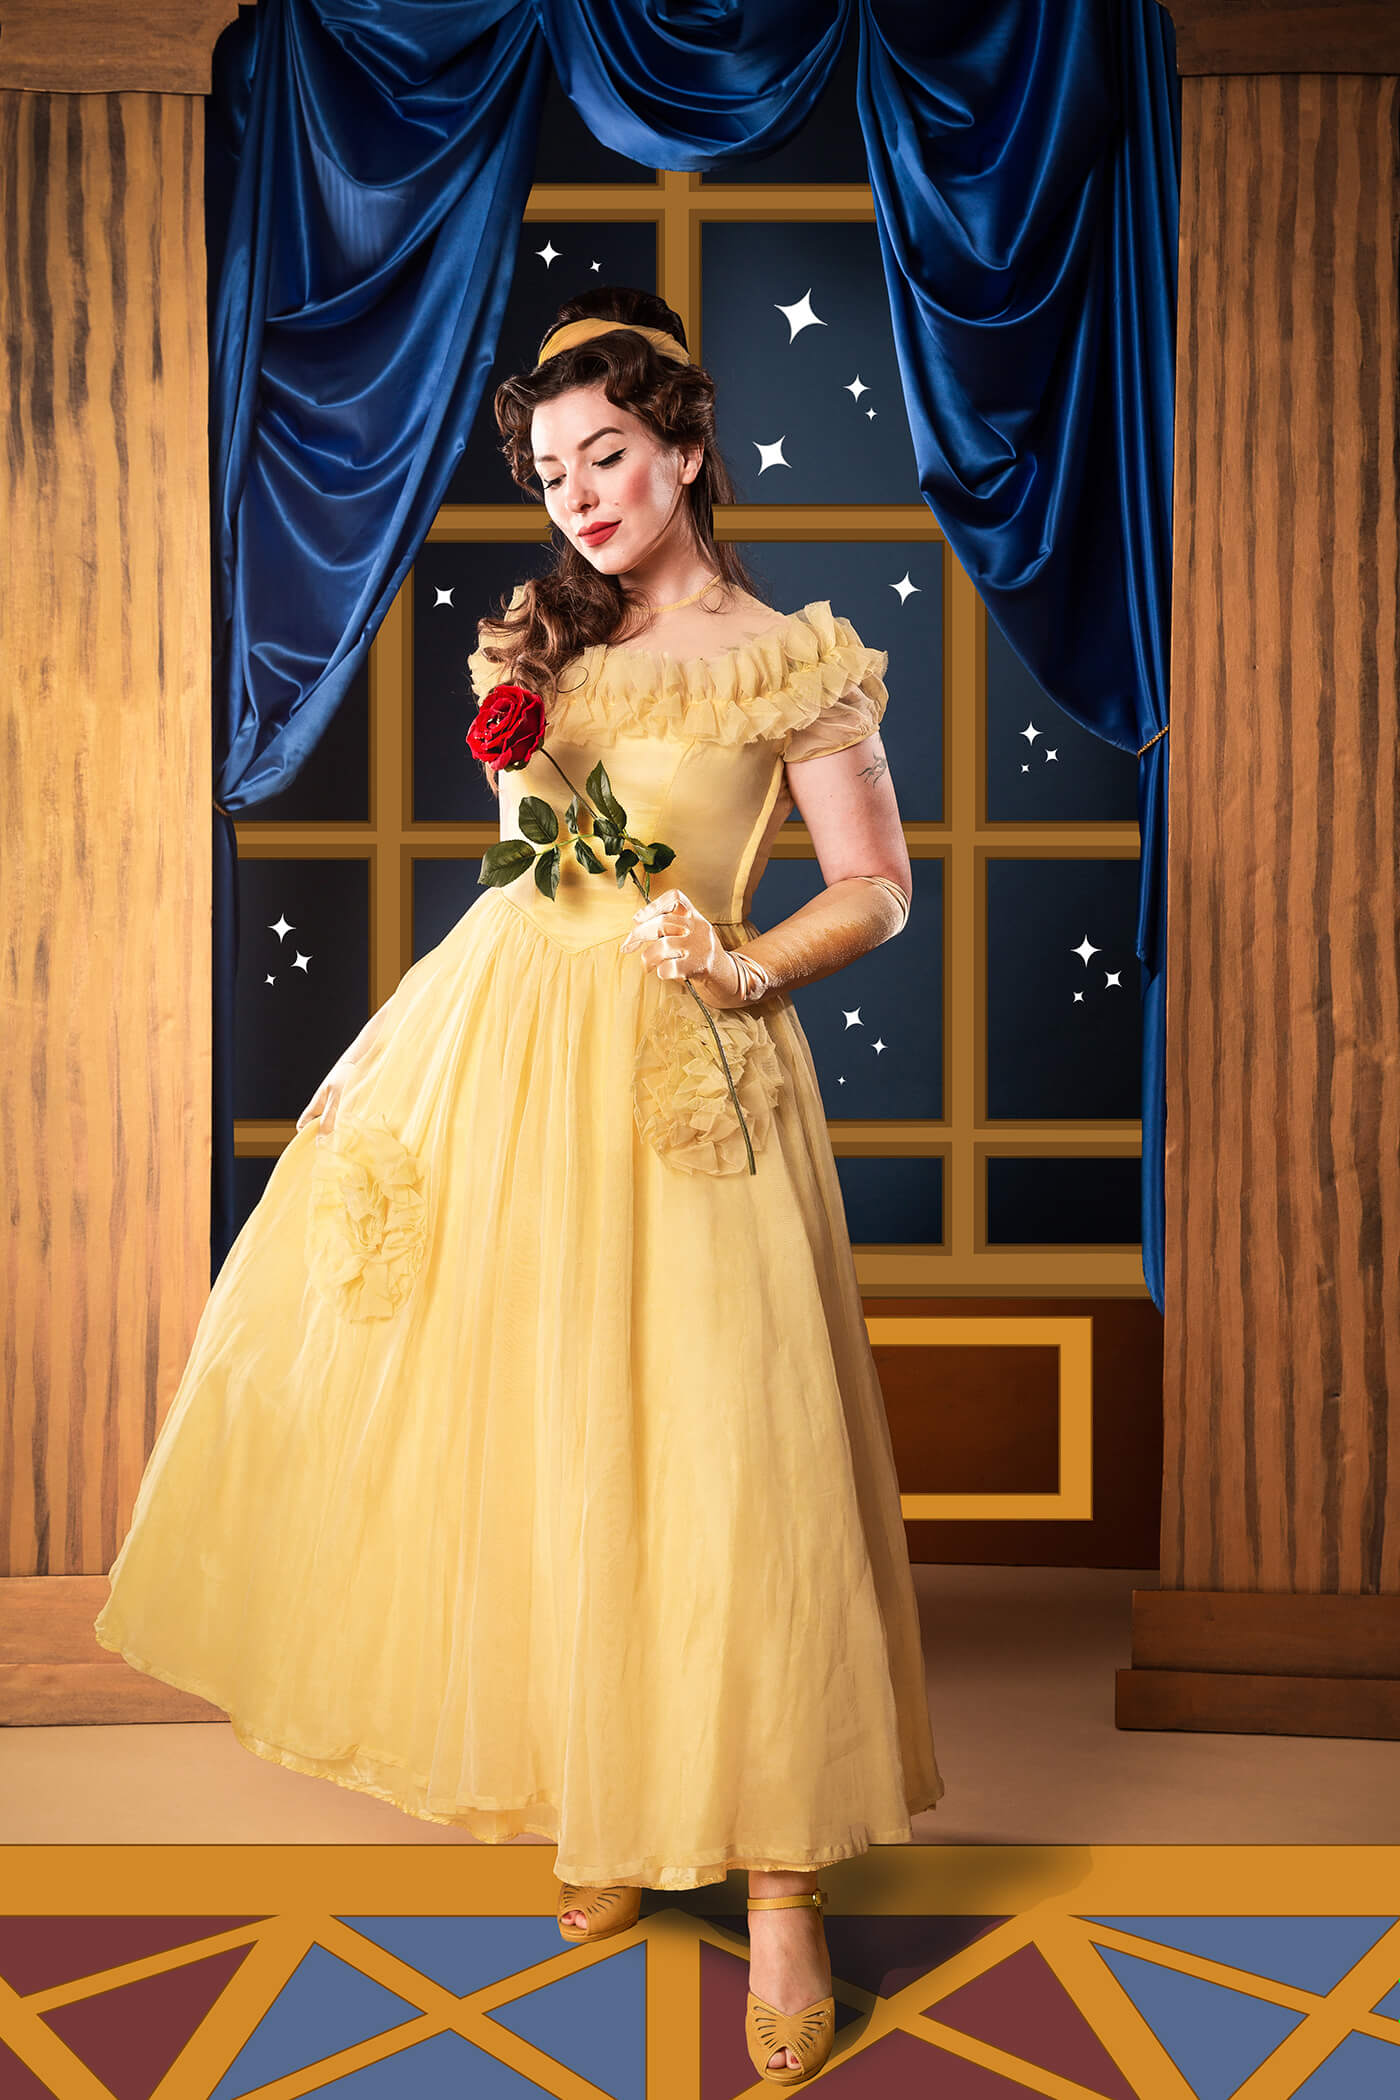 Disney Halloween Costume: Belle from Beauty and the Beast 